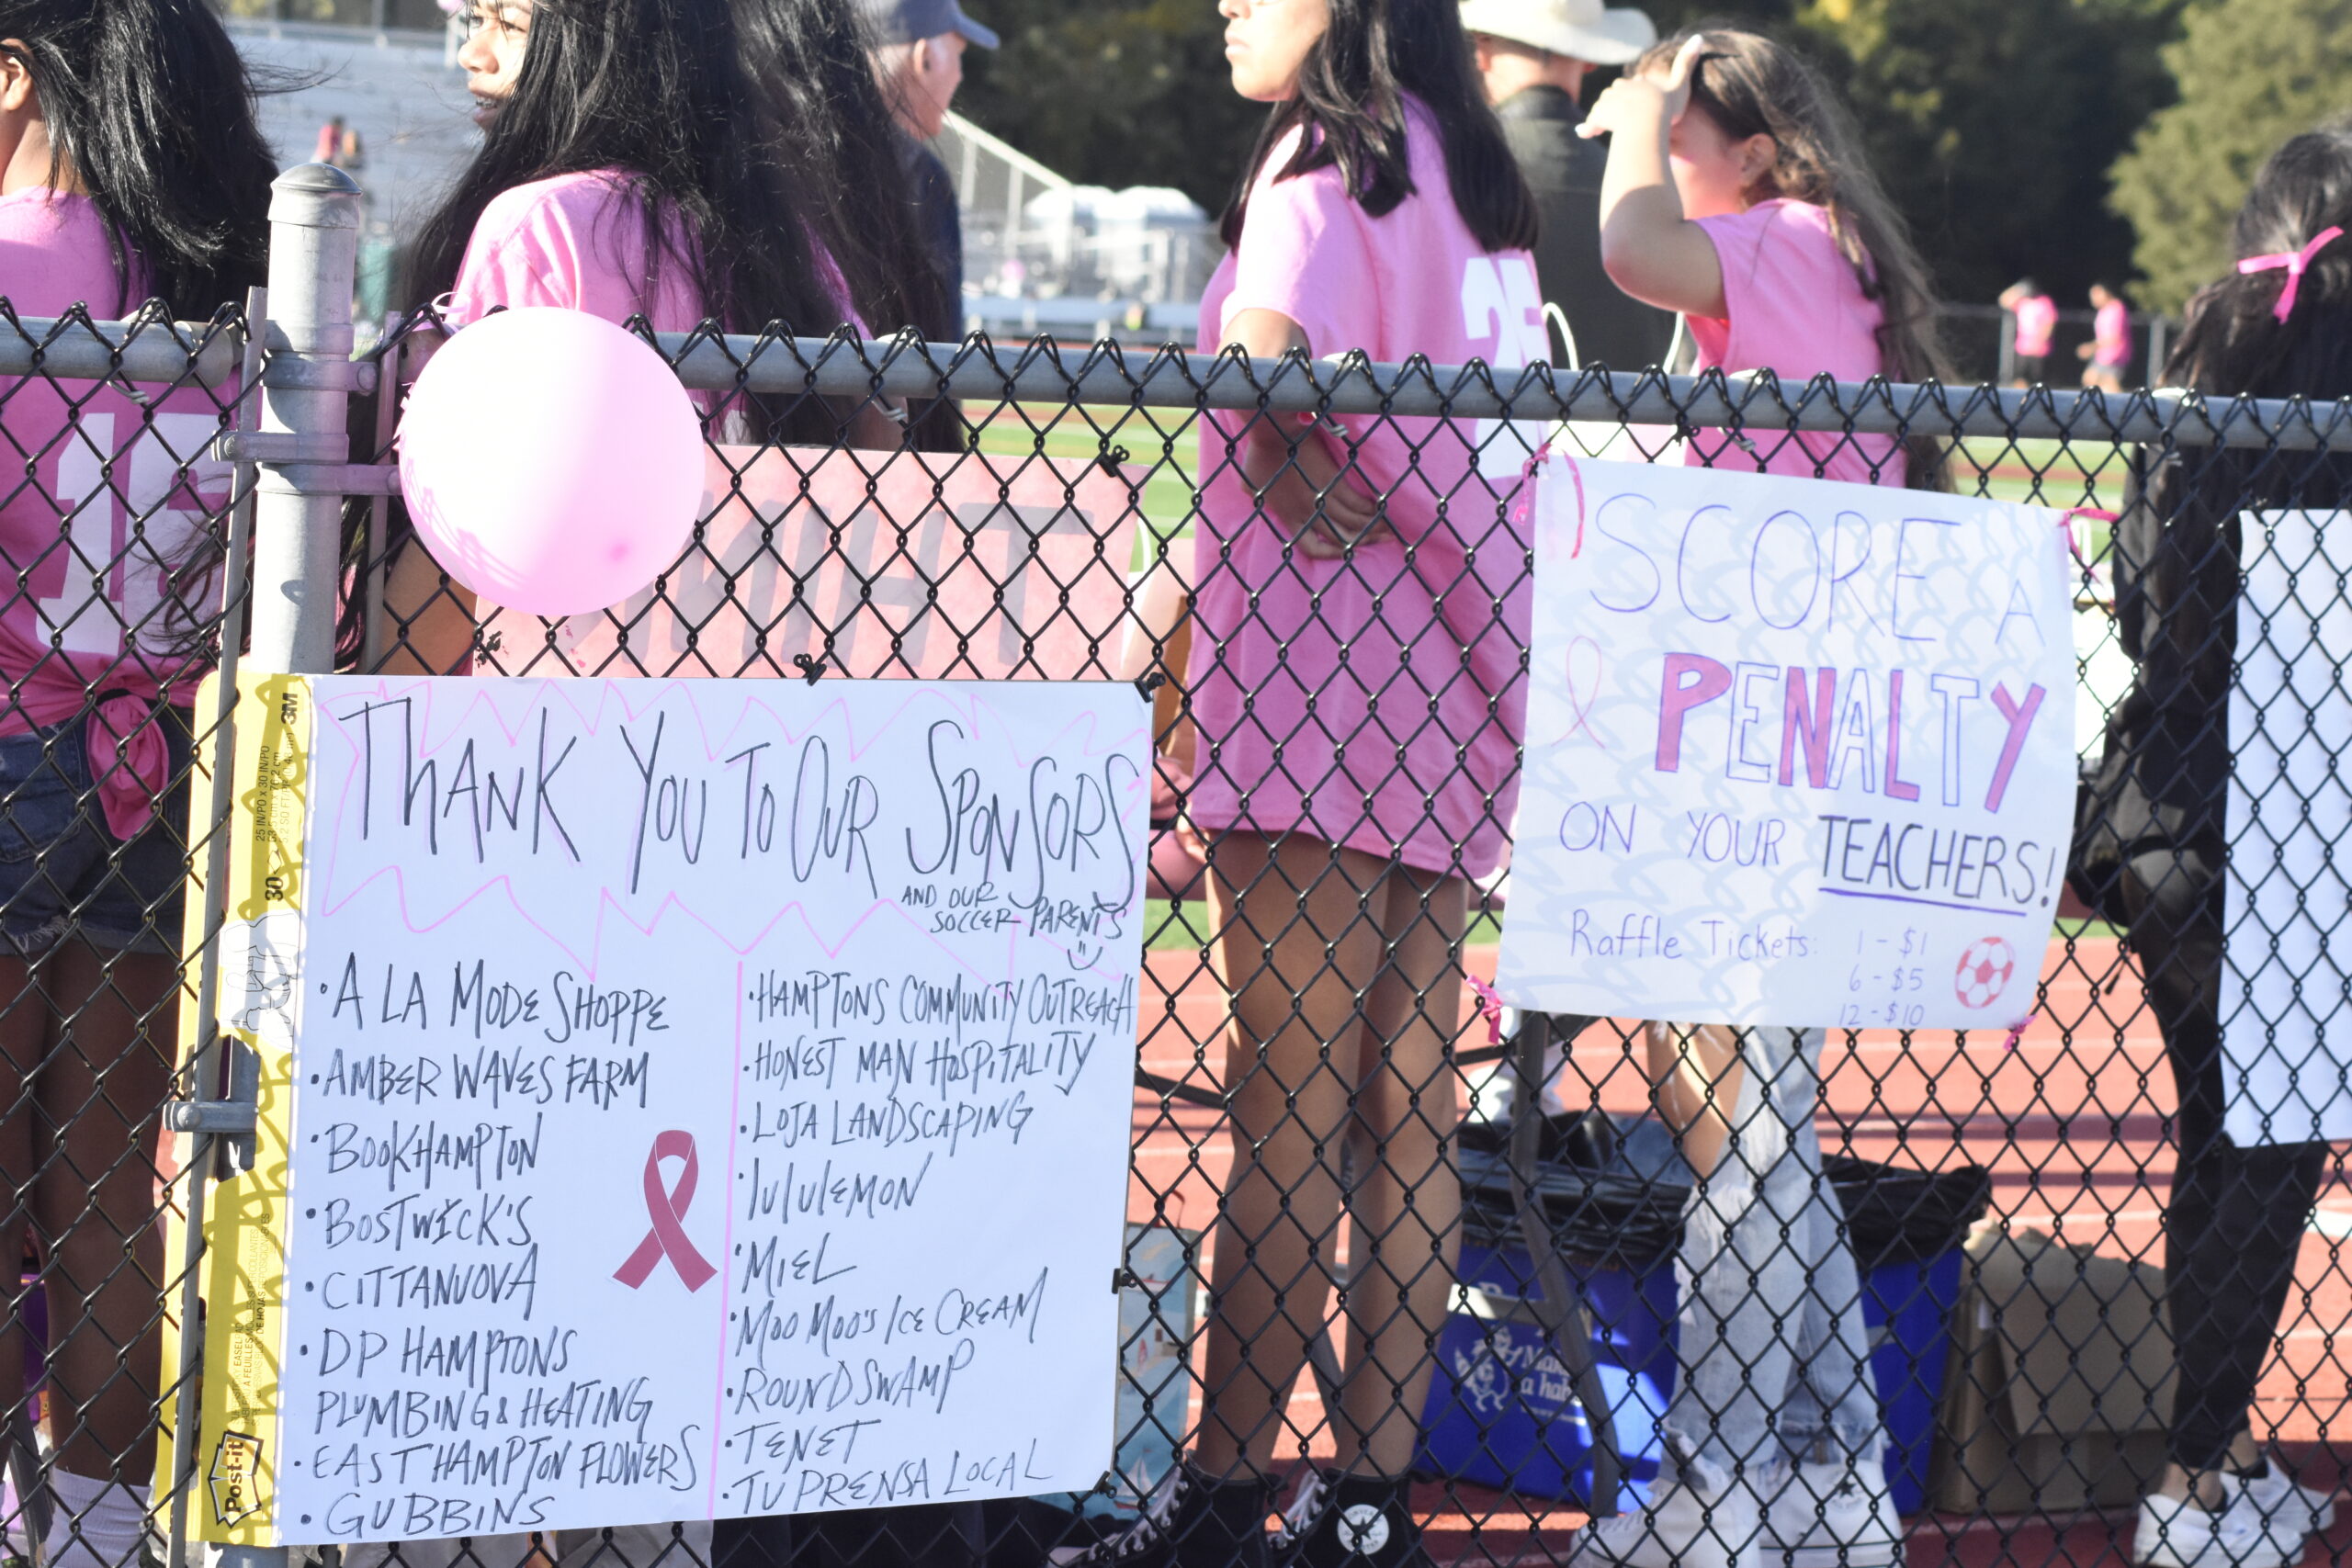 The East Hampton girls soccer program hosted the second annual Battle of the Bonackers, a charity event that raises funds for Kicks For Cancer.   DREW BUDD